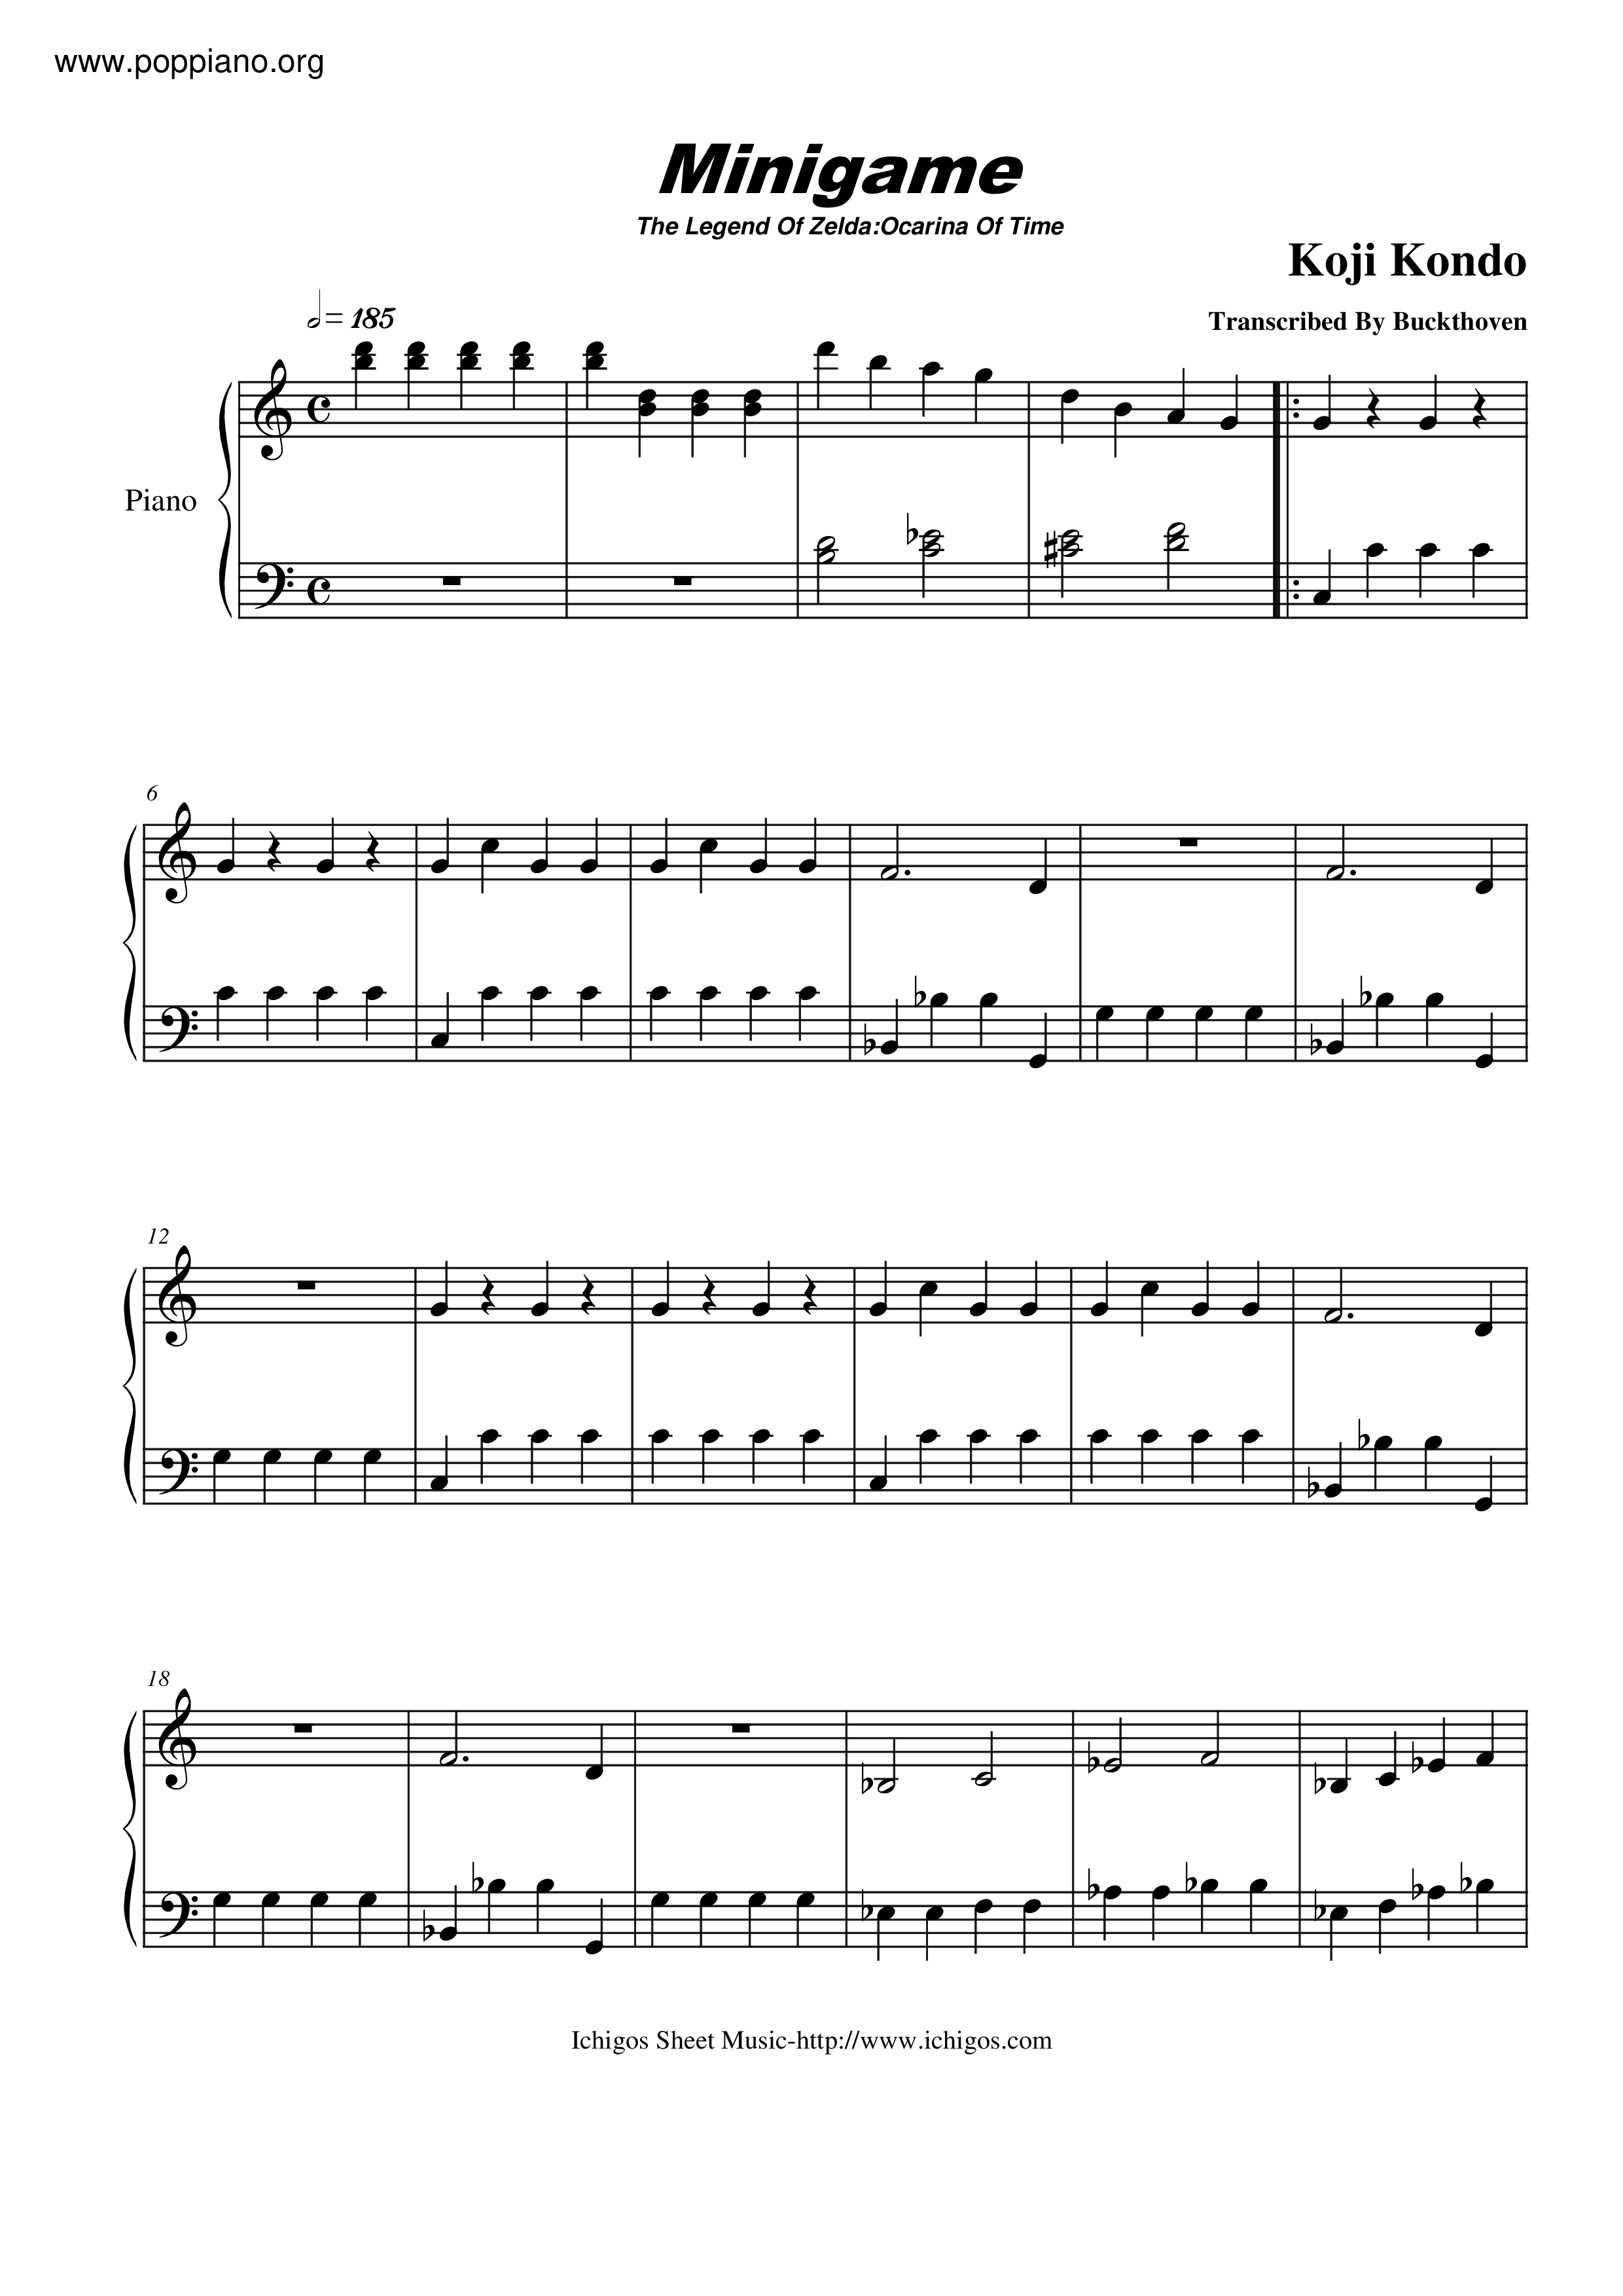 ☆ The Legend of Zelda: Ocarina of Time-Song Of Time Sheet Music pdf, - Free  Score Download ☆